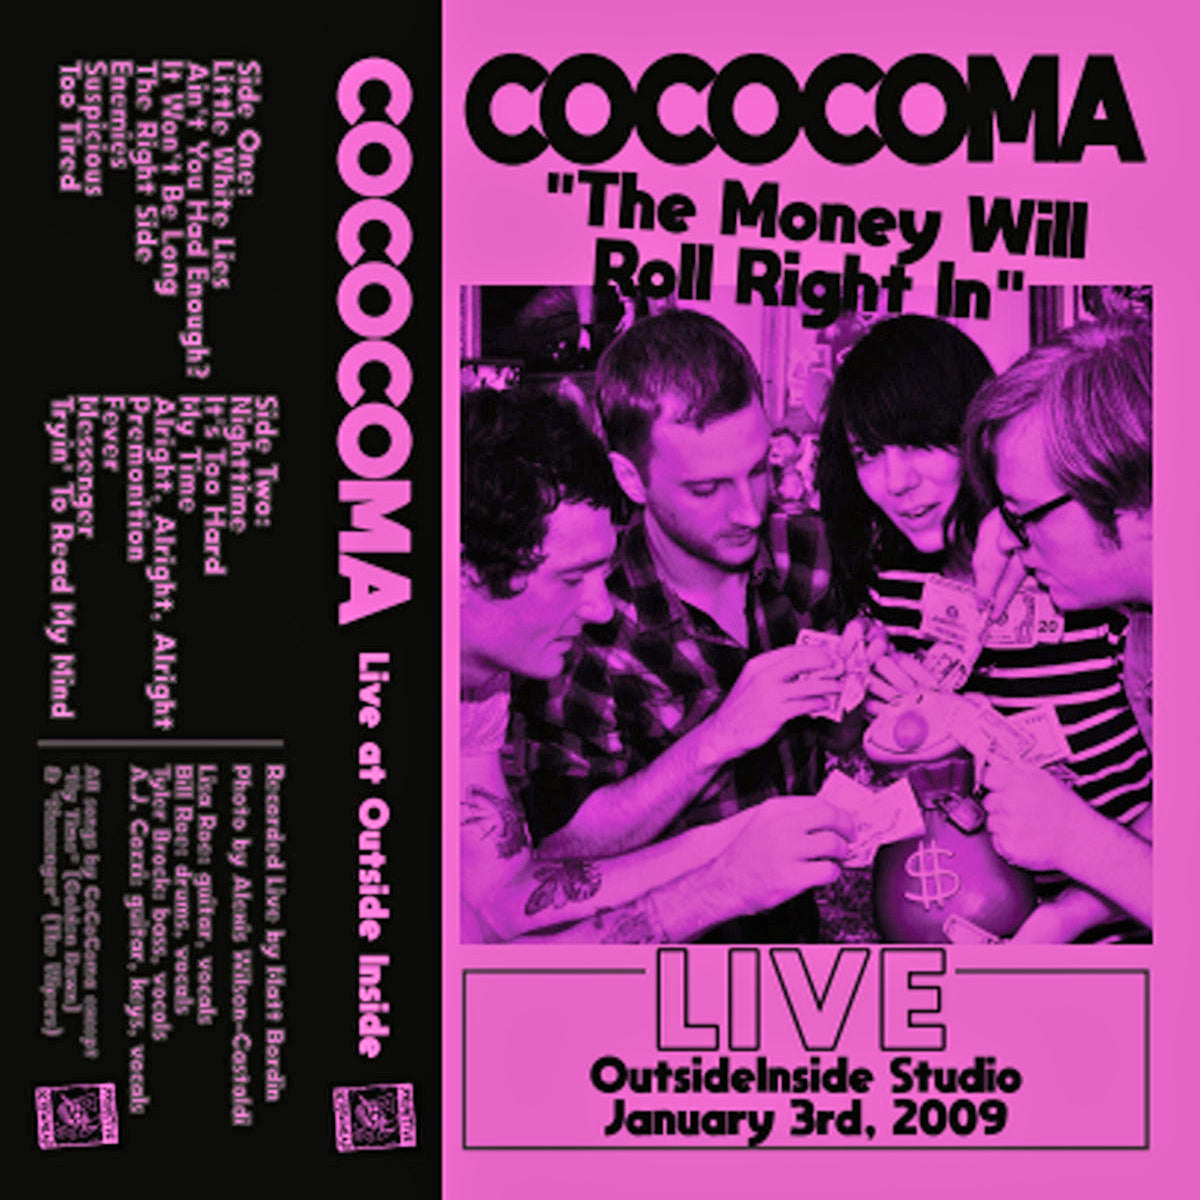 Cococoma- The Money Will Roll Right In: Live At Outside Inside Studio CS Tape